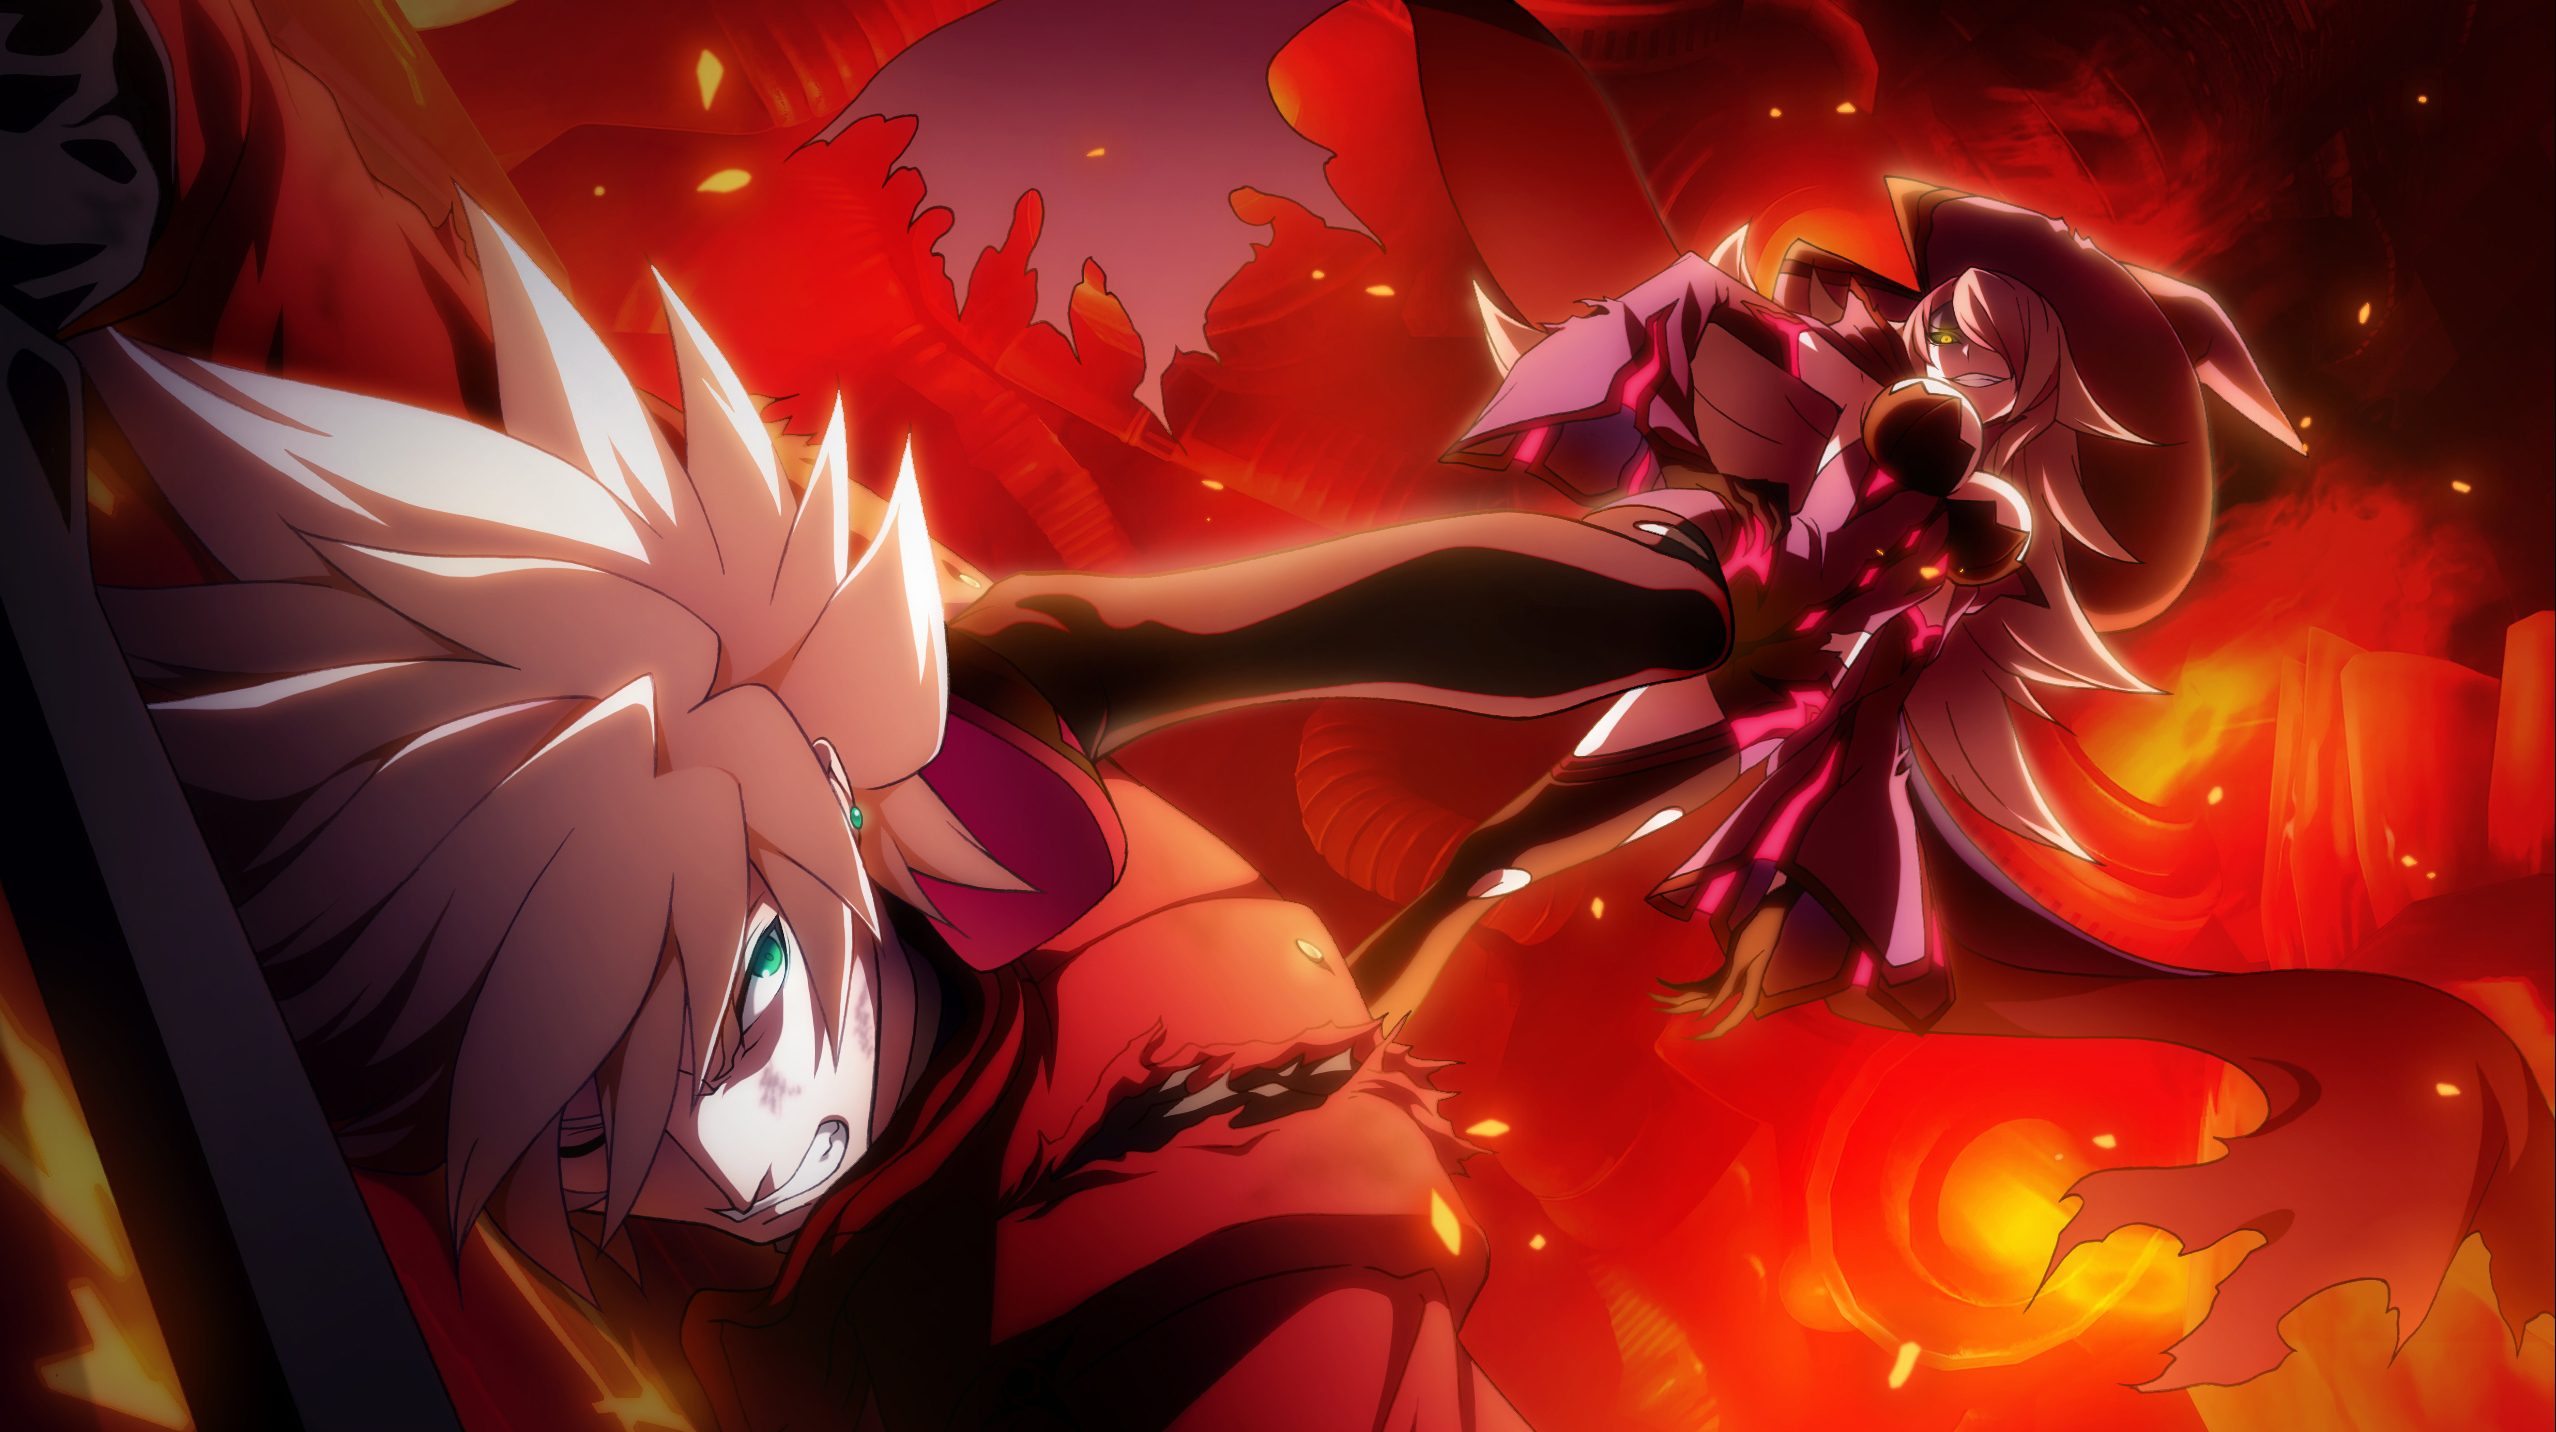 BlazBlue: Central Fiction Special Edition slashes onto the Nintendo Switch